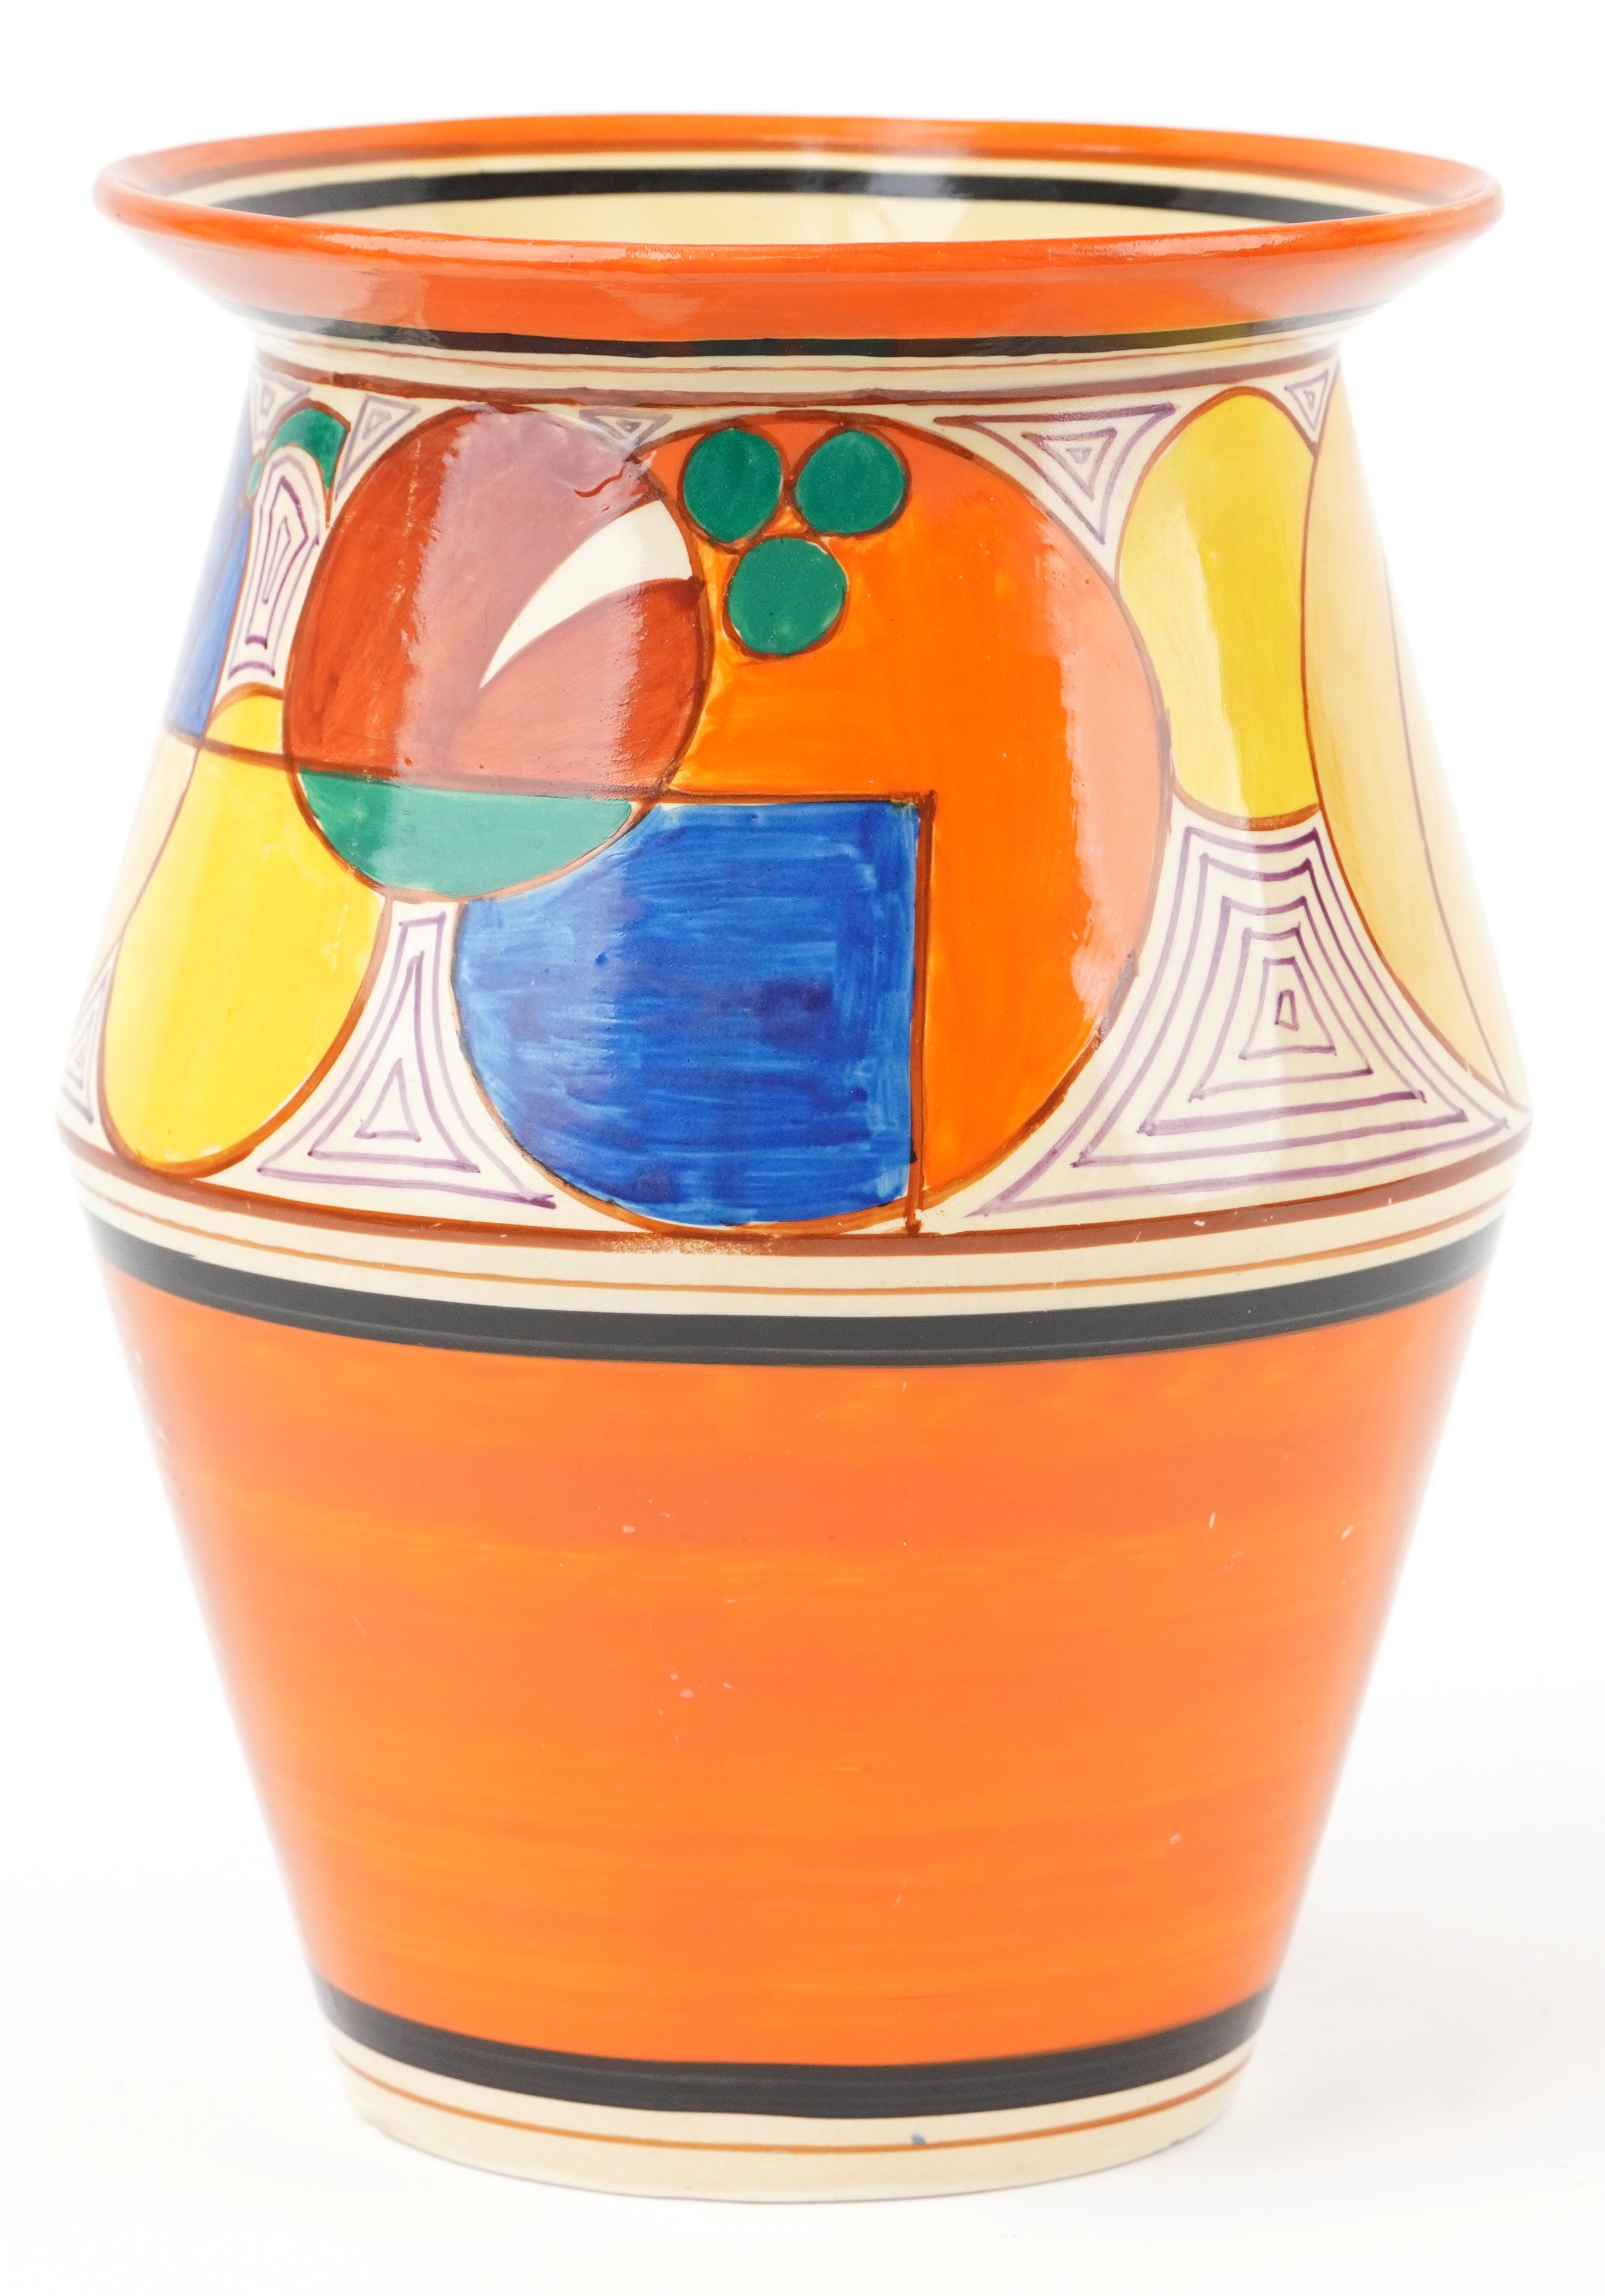 Clarice Cliff, large Art Deco Fantastique Bizarre Tolphin wash jug hand painted in the melon - Image 3 of 8